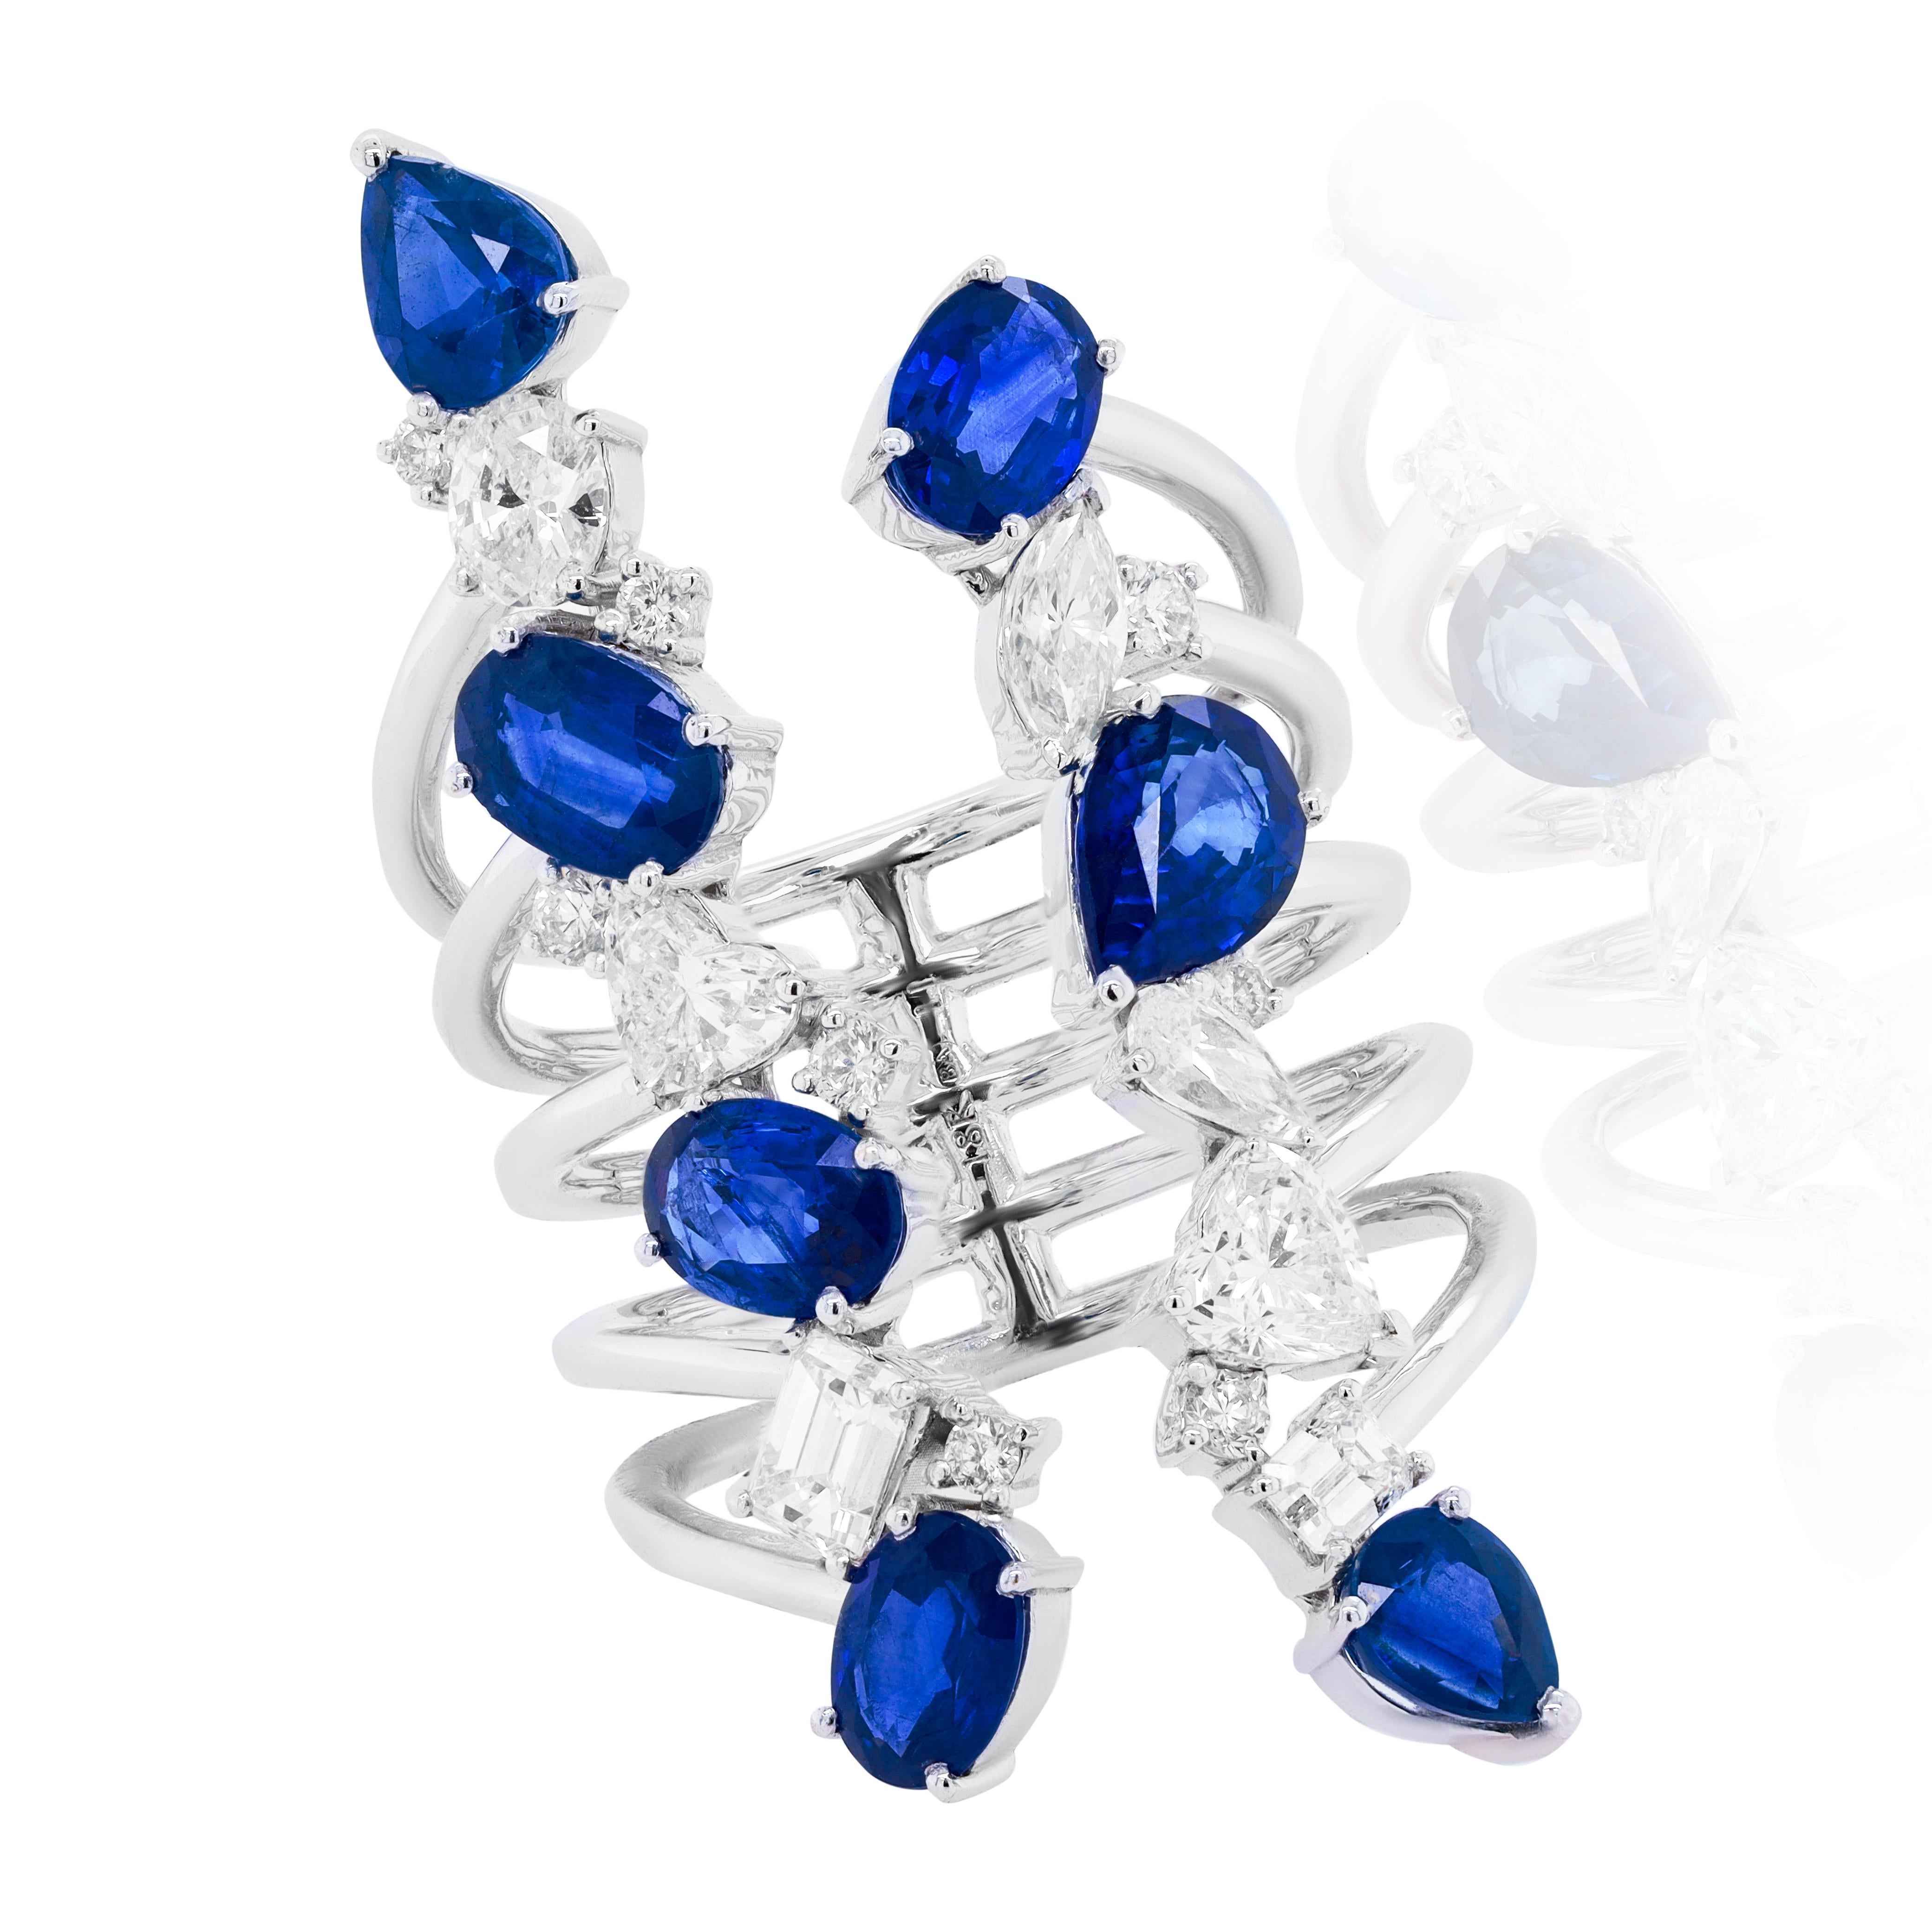 18 kt white gold sapphire and diamond open ring featuring 4.31 cts tw of multishape sapphires and 1.68 cts tw of multishape white diamonds at the ends of 5 different open rows.
Diana M. is a leading supplier of top-quality fine jewelry for over 35